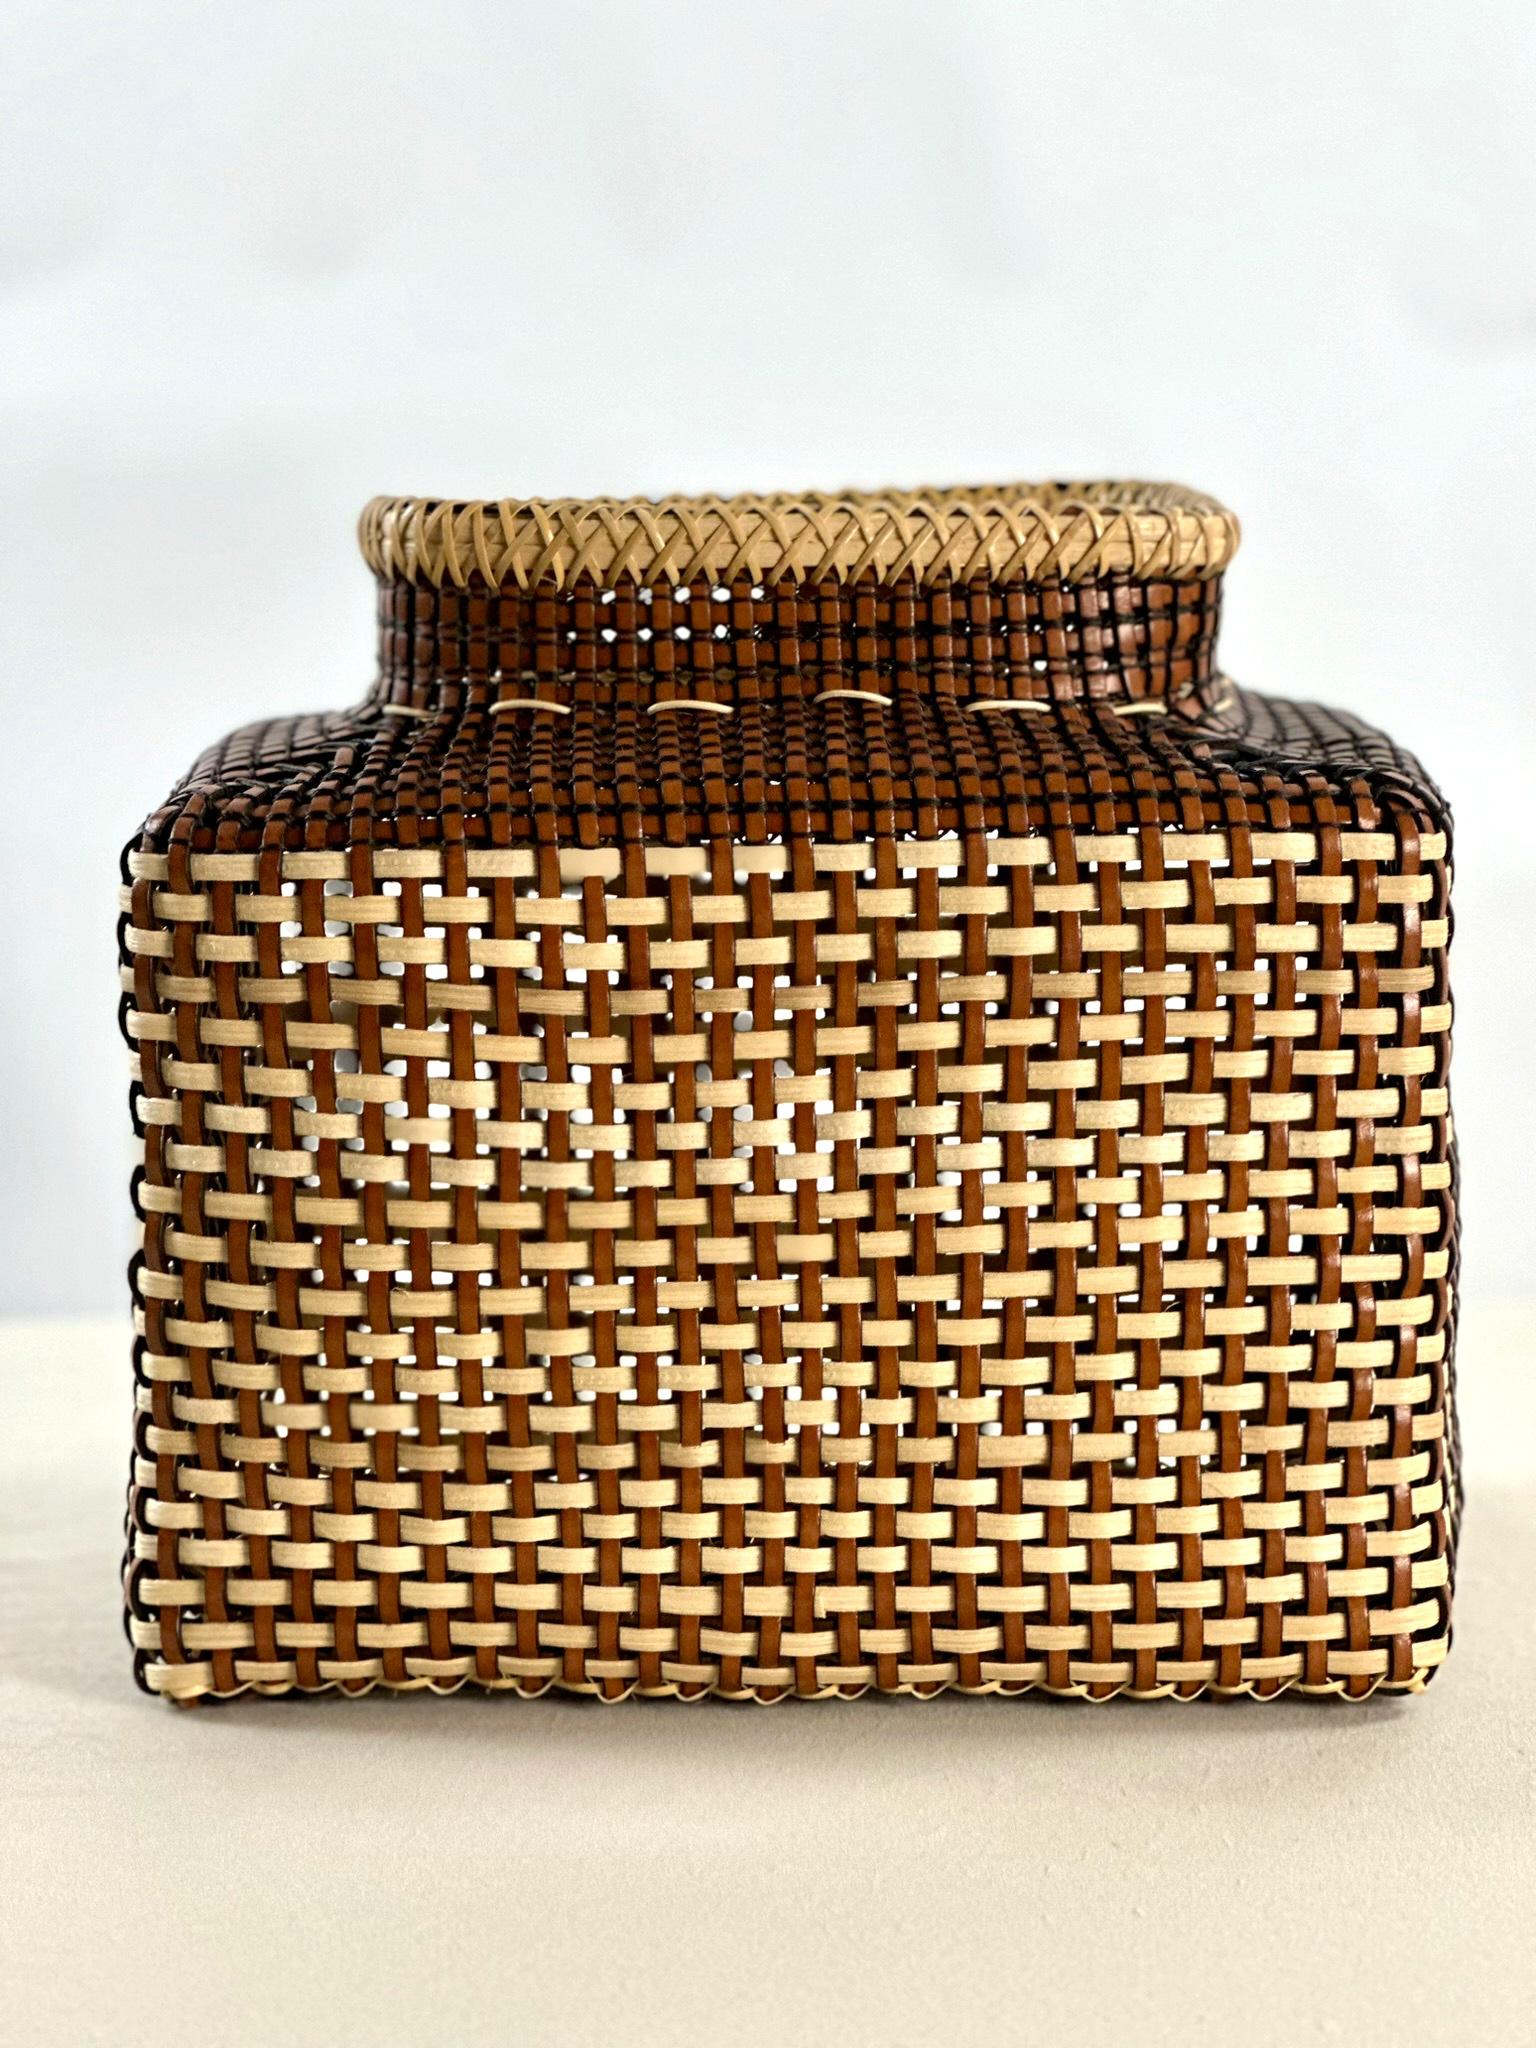 JoverValls continues its work of creating objects that recover the traditions of local craftsmanship.

JoverValls is pleased to present its new collection of basketry, an innovative fusion of materials in which leather, brass, and cane intertwine to